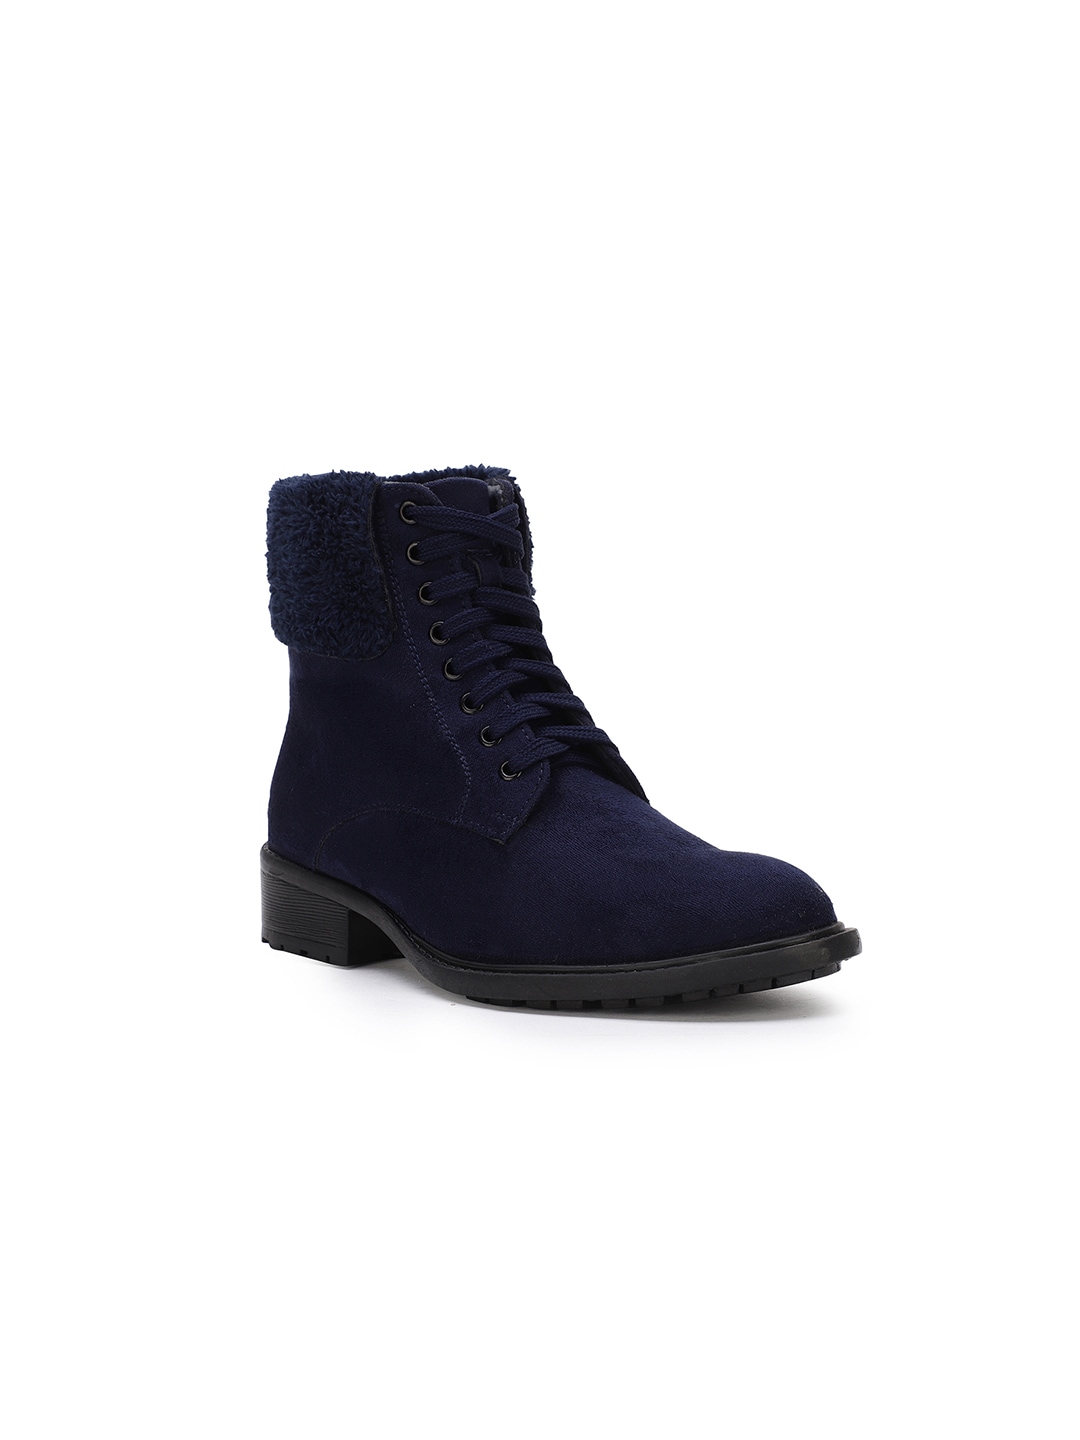 Bruno Manetti Women Navy Blue Solid Heeled Boots Price in India